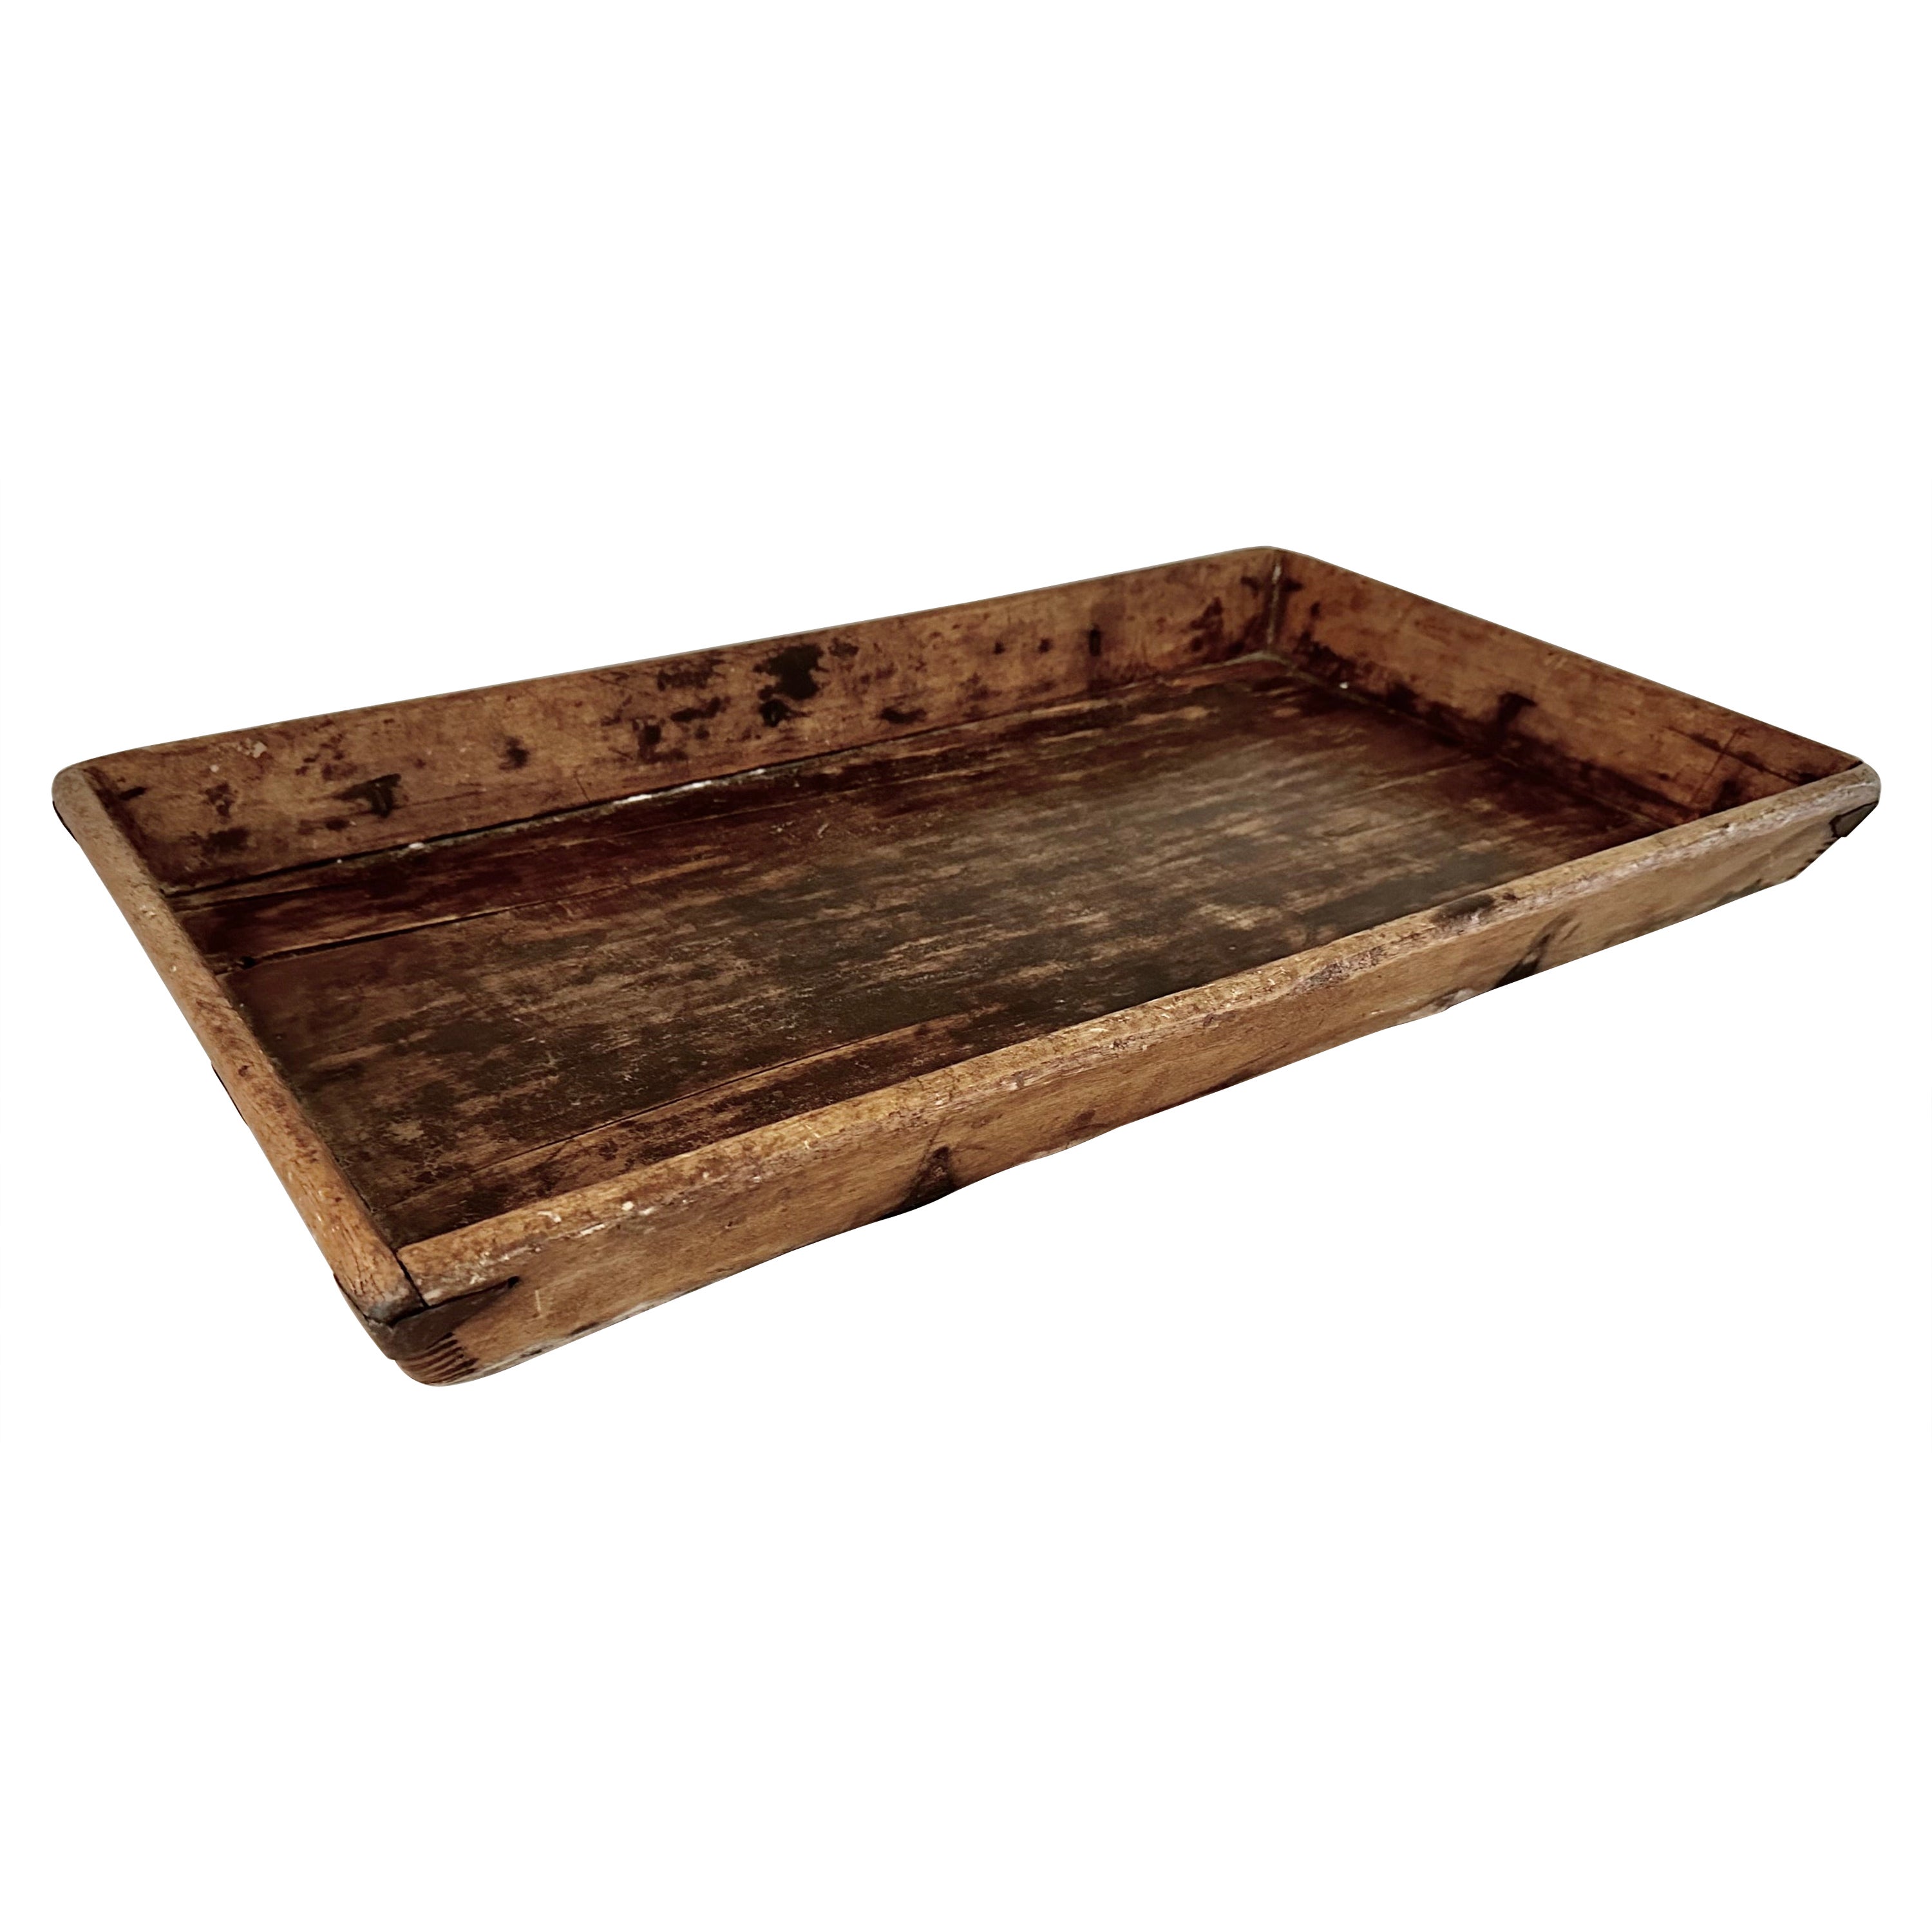 Rustic Provincial Style Chinese Tea Tray For Sale